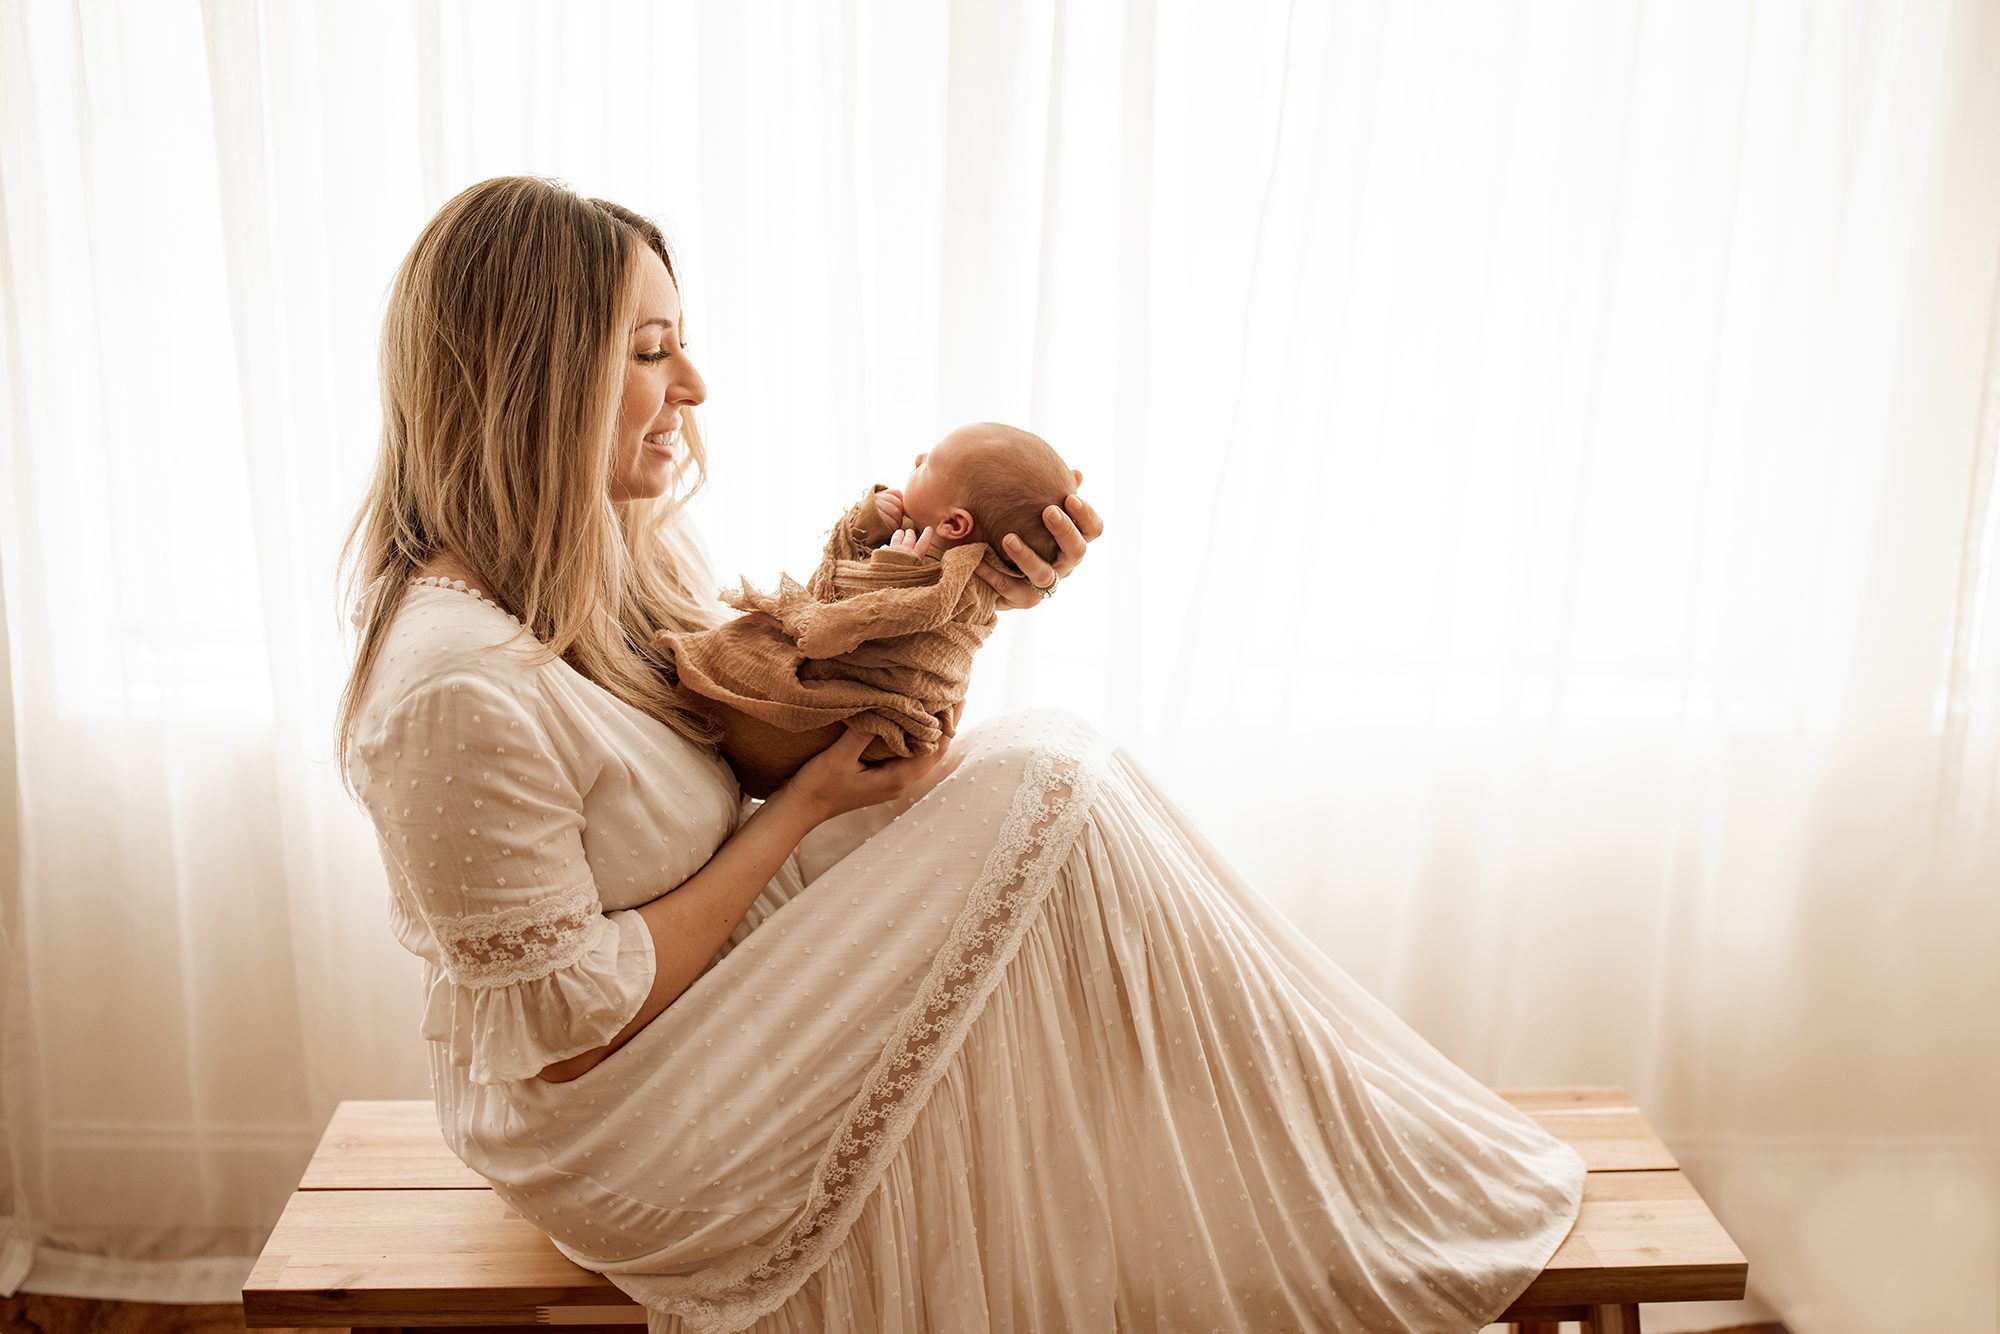 What to wear to my newborn photography session